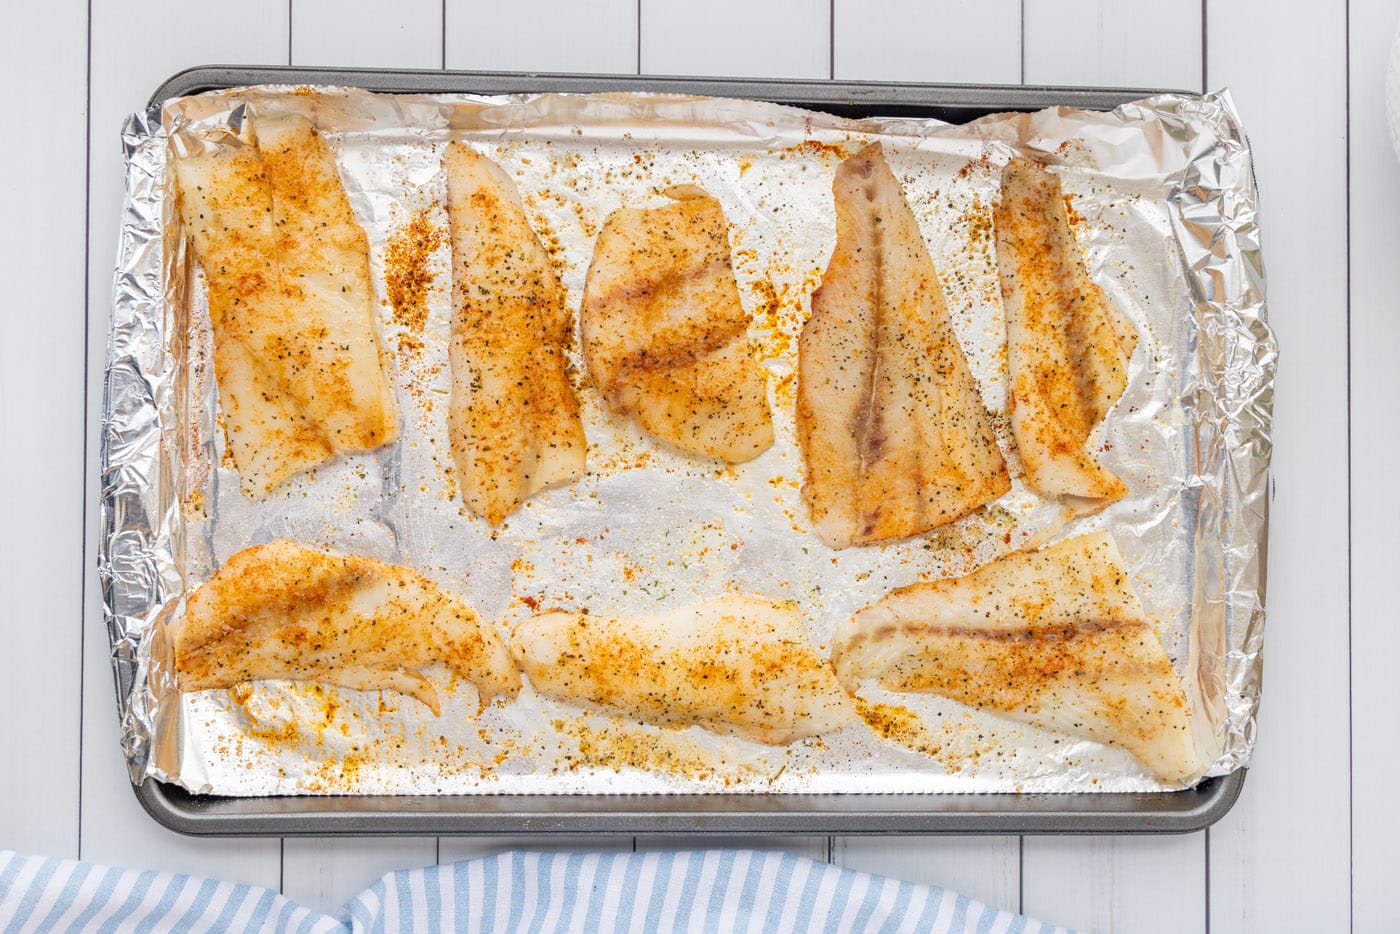 How To Grill Orange Roughy In Foil - Recipes.net